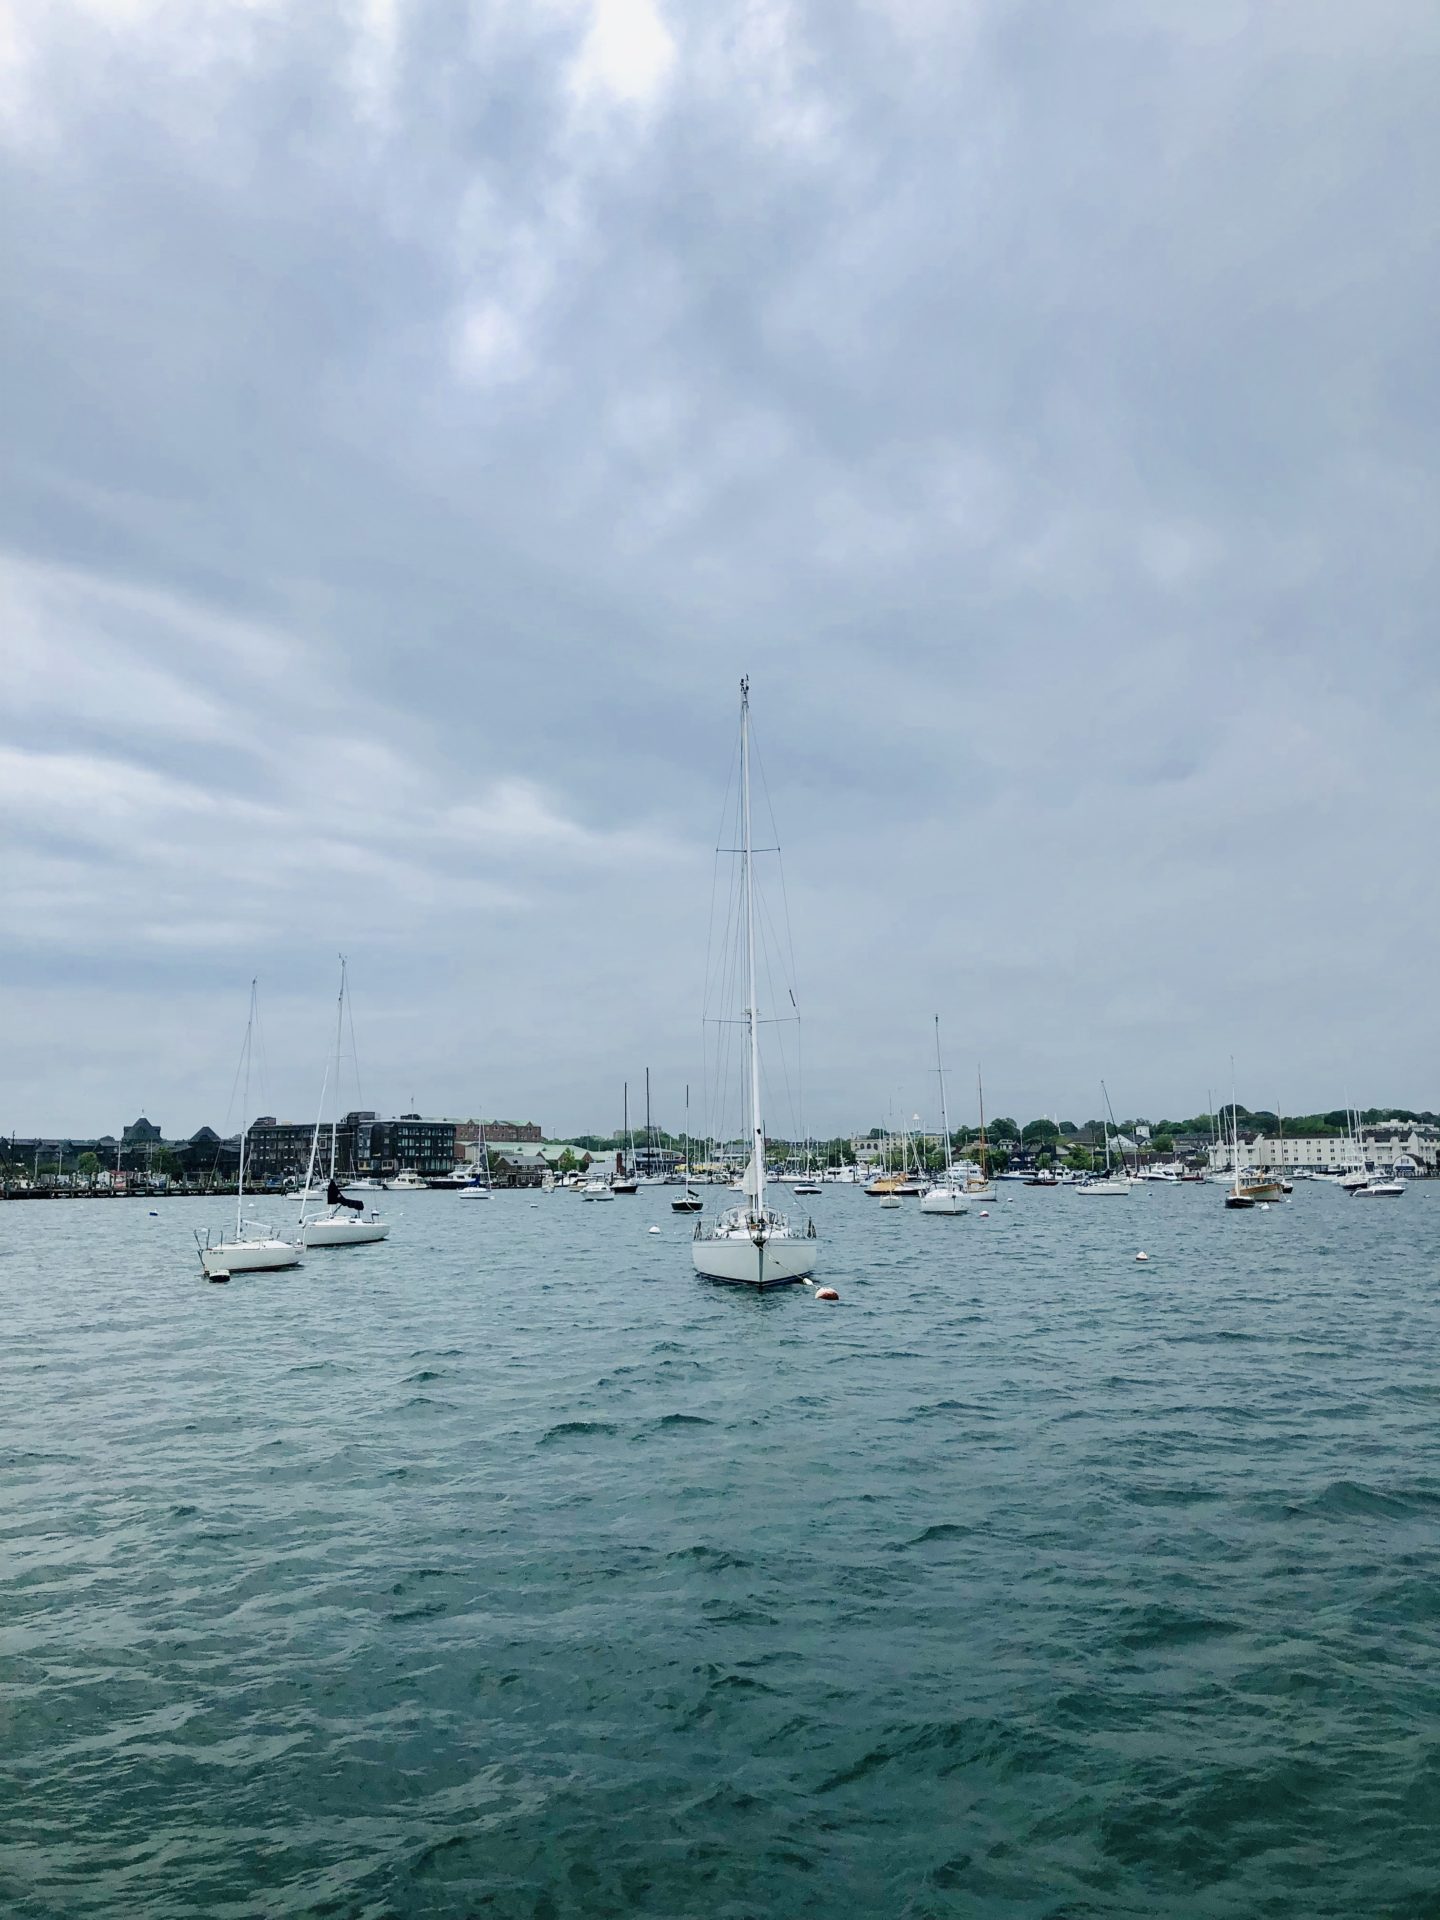 Lifestyle Blogger Chocolate & Lace shares her engagement weekend on the Belafonte in Newport, Rhode Island.